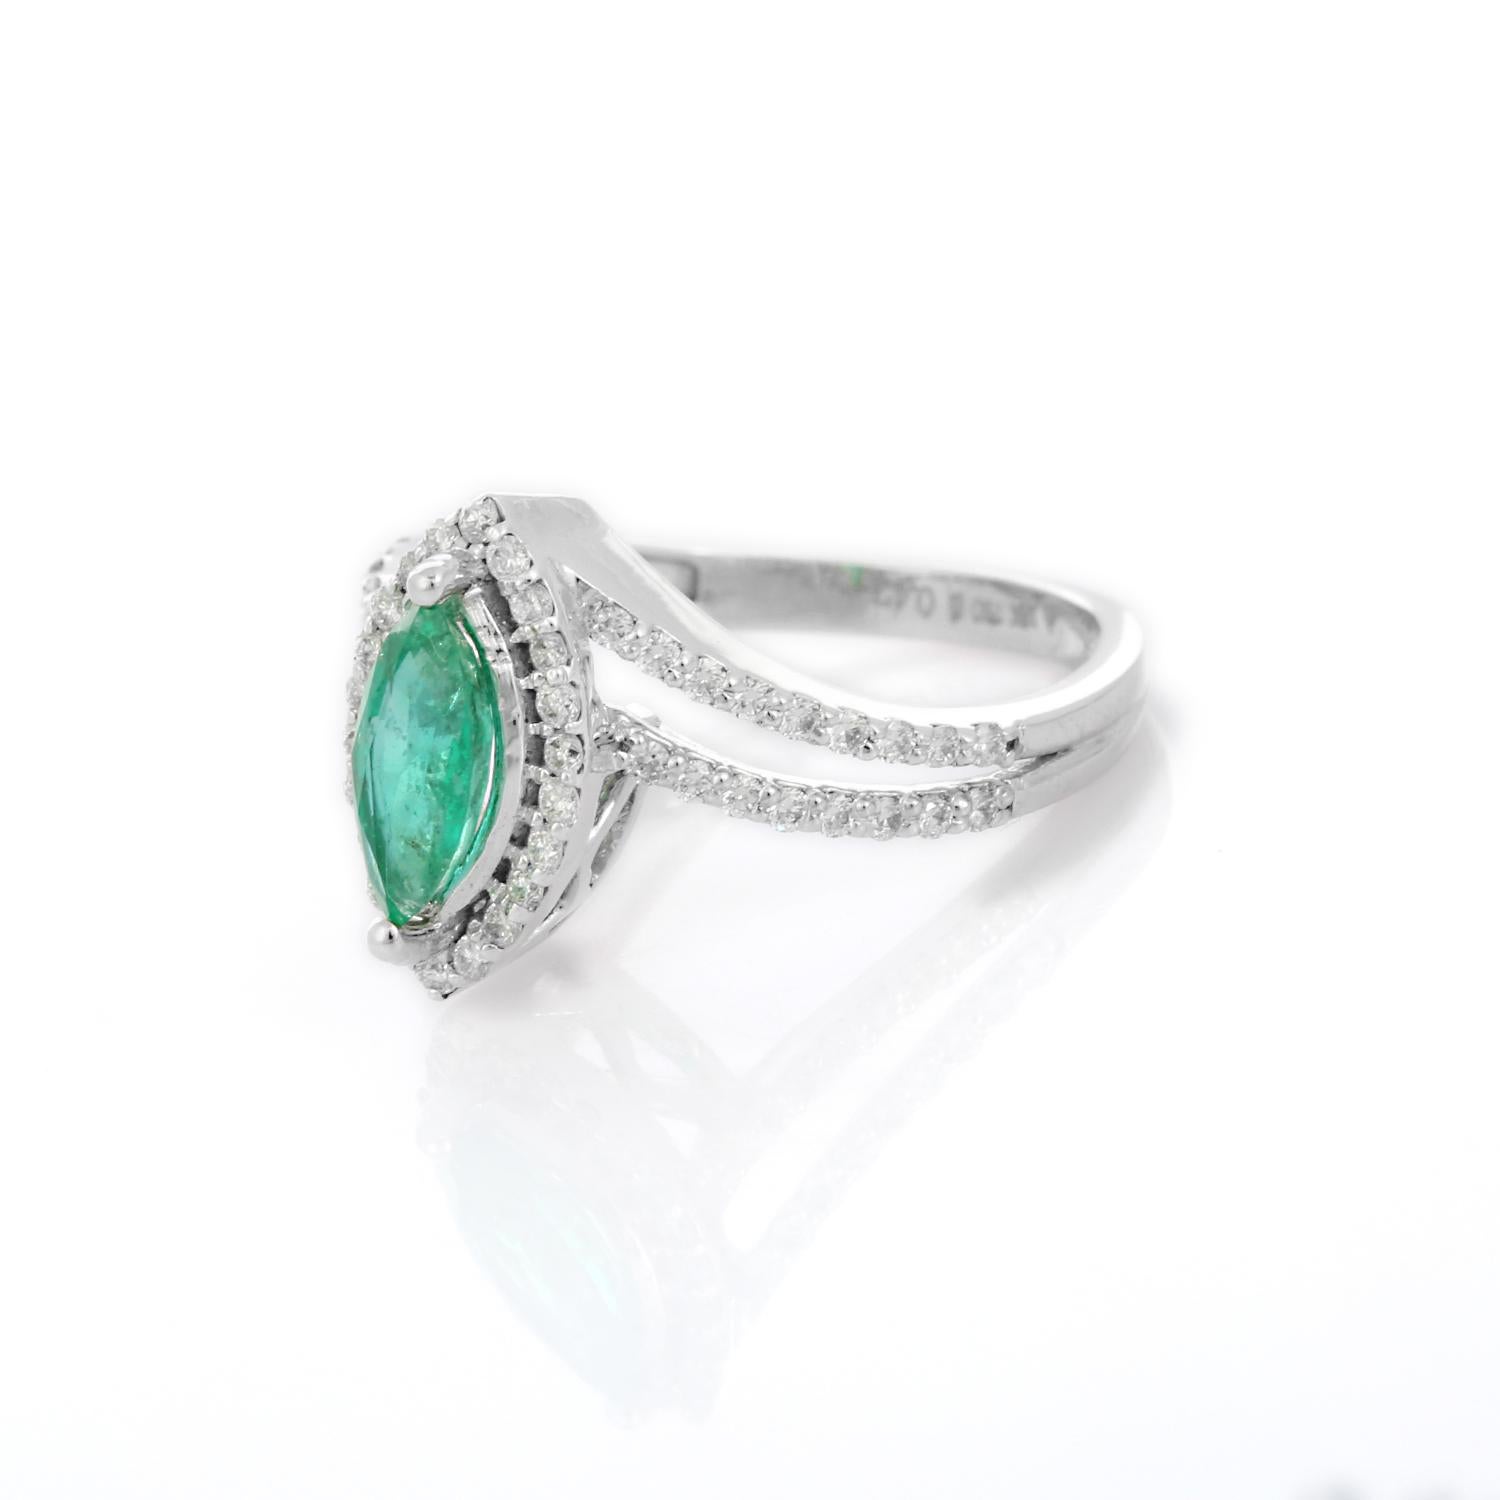 For Sale:  Marquise Shaped Emerald and Diamond Ring in 18K White Gold  4